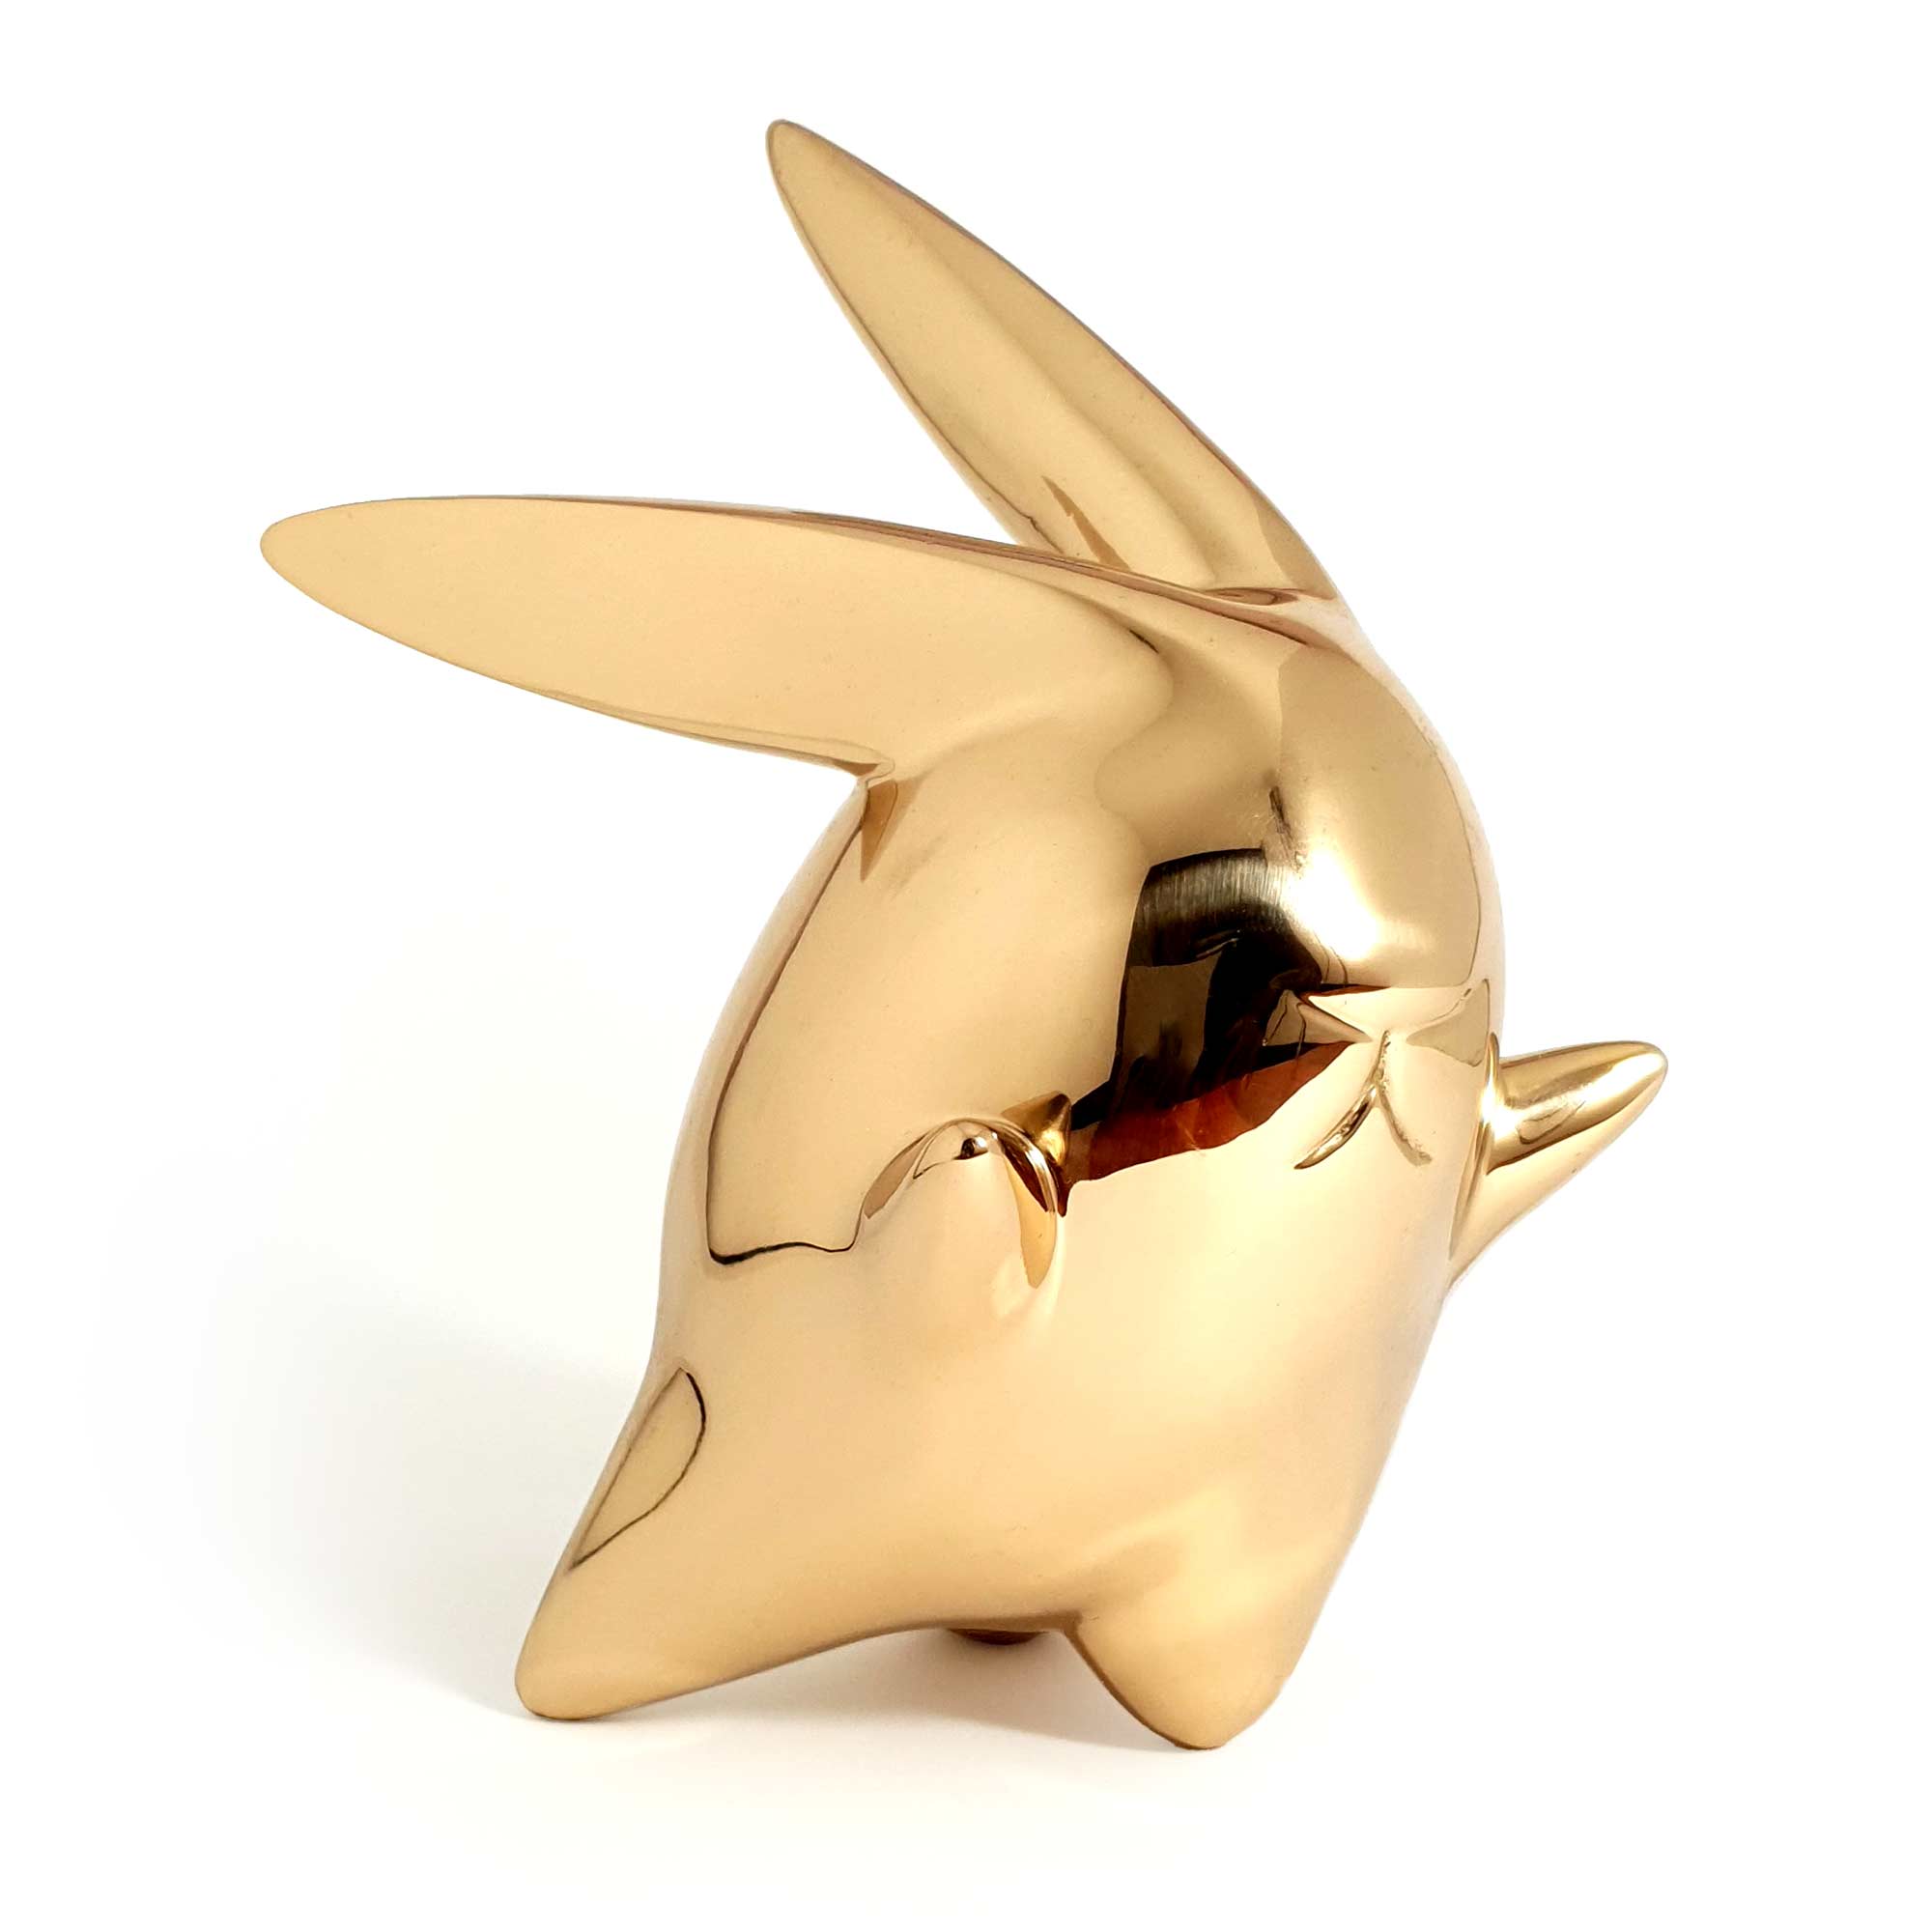 Flight or Fight, bunny rabbit sculpture, gold Mirror Polished Stainless Steel Sculpture, by artist Ferdi B Dick, hero view